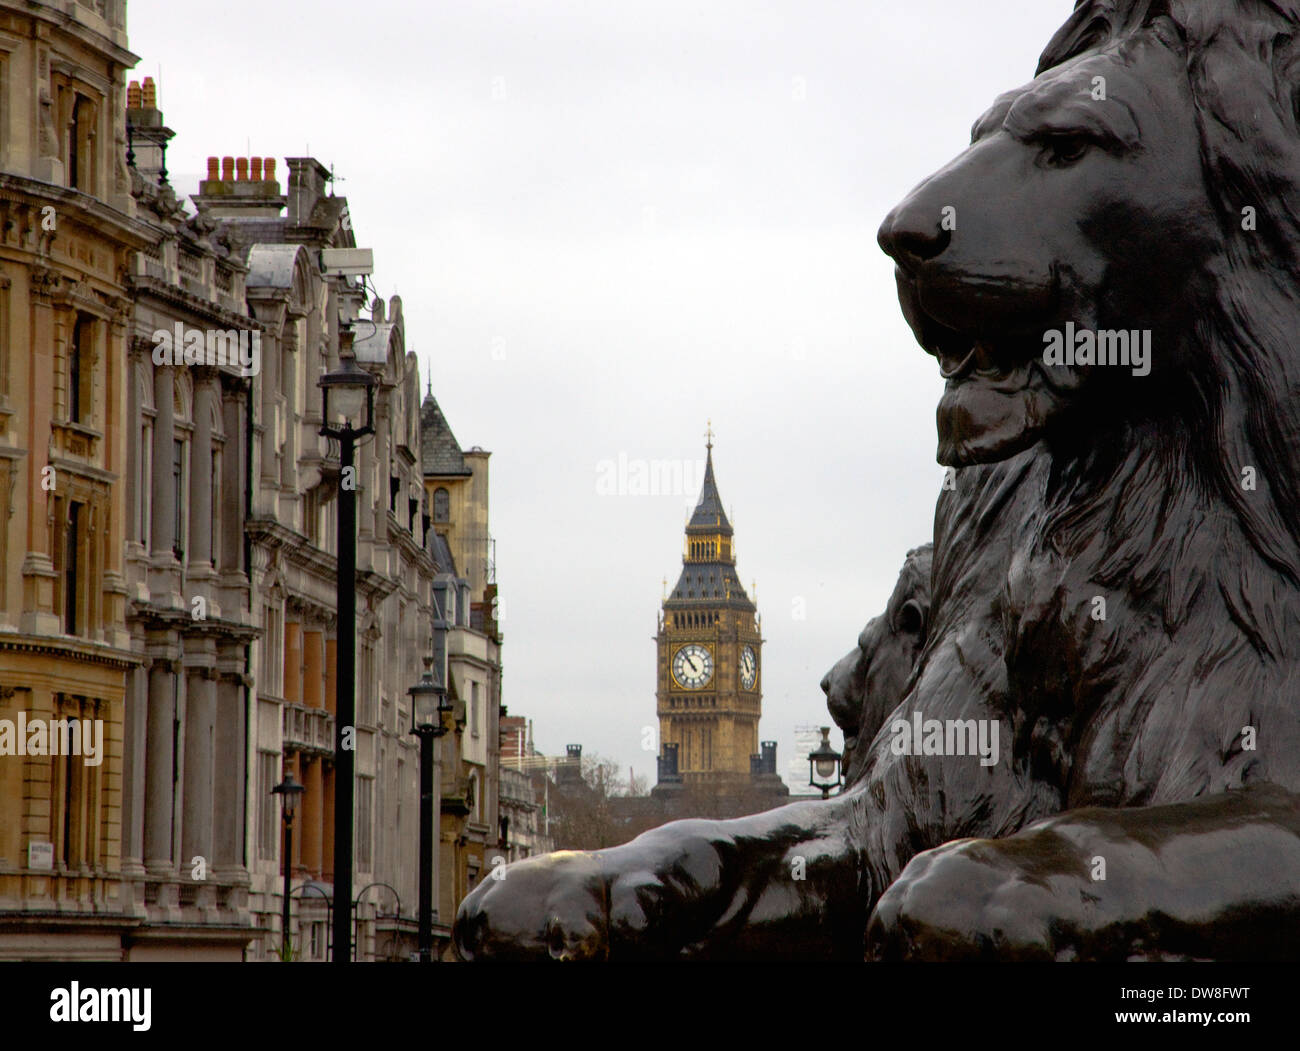 London's Trafalgar square Lions two statues with Big Ben Westminster clock tower in background Stock Photo